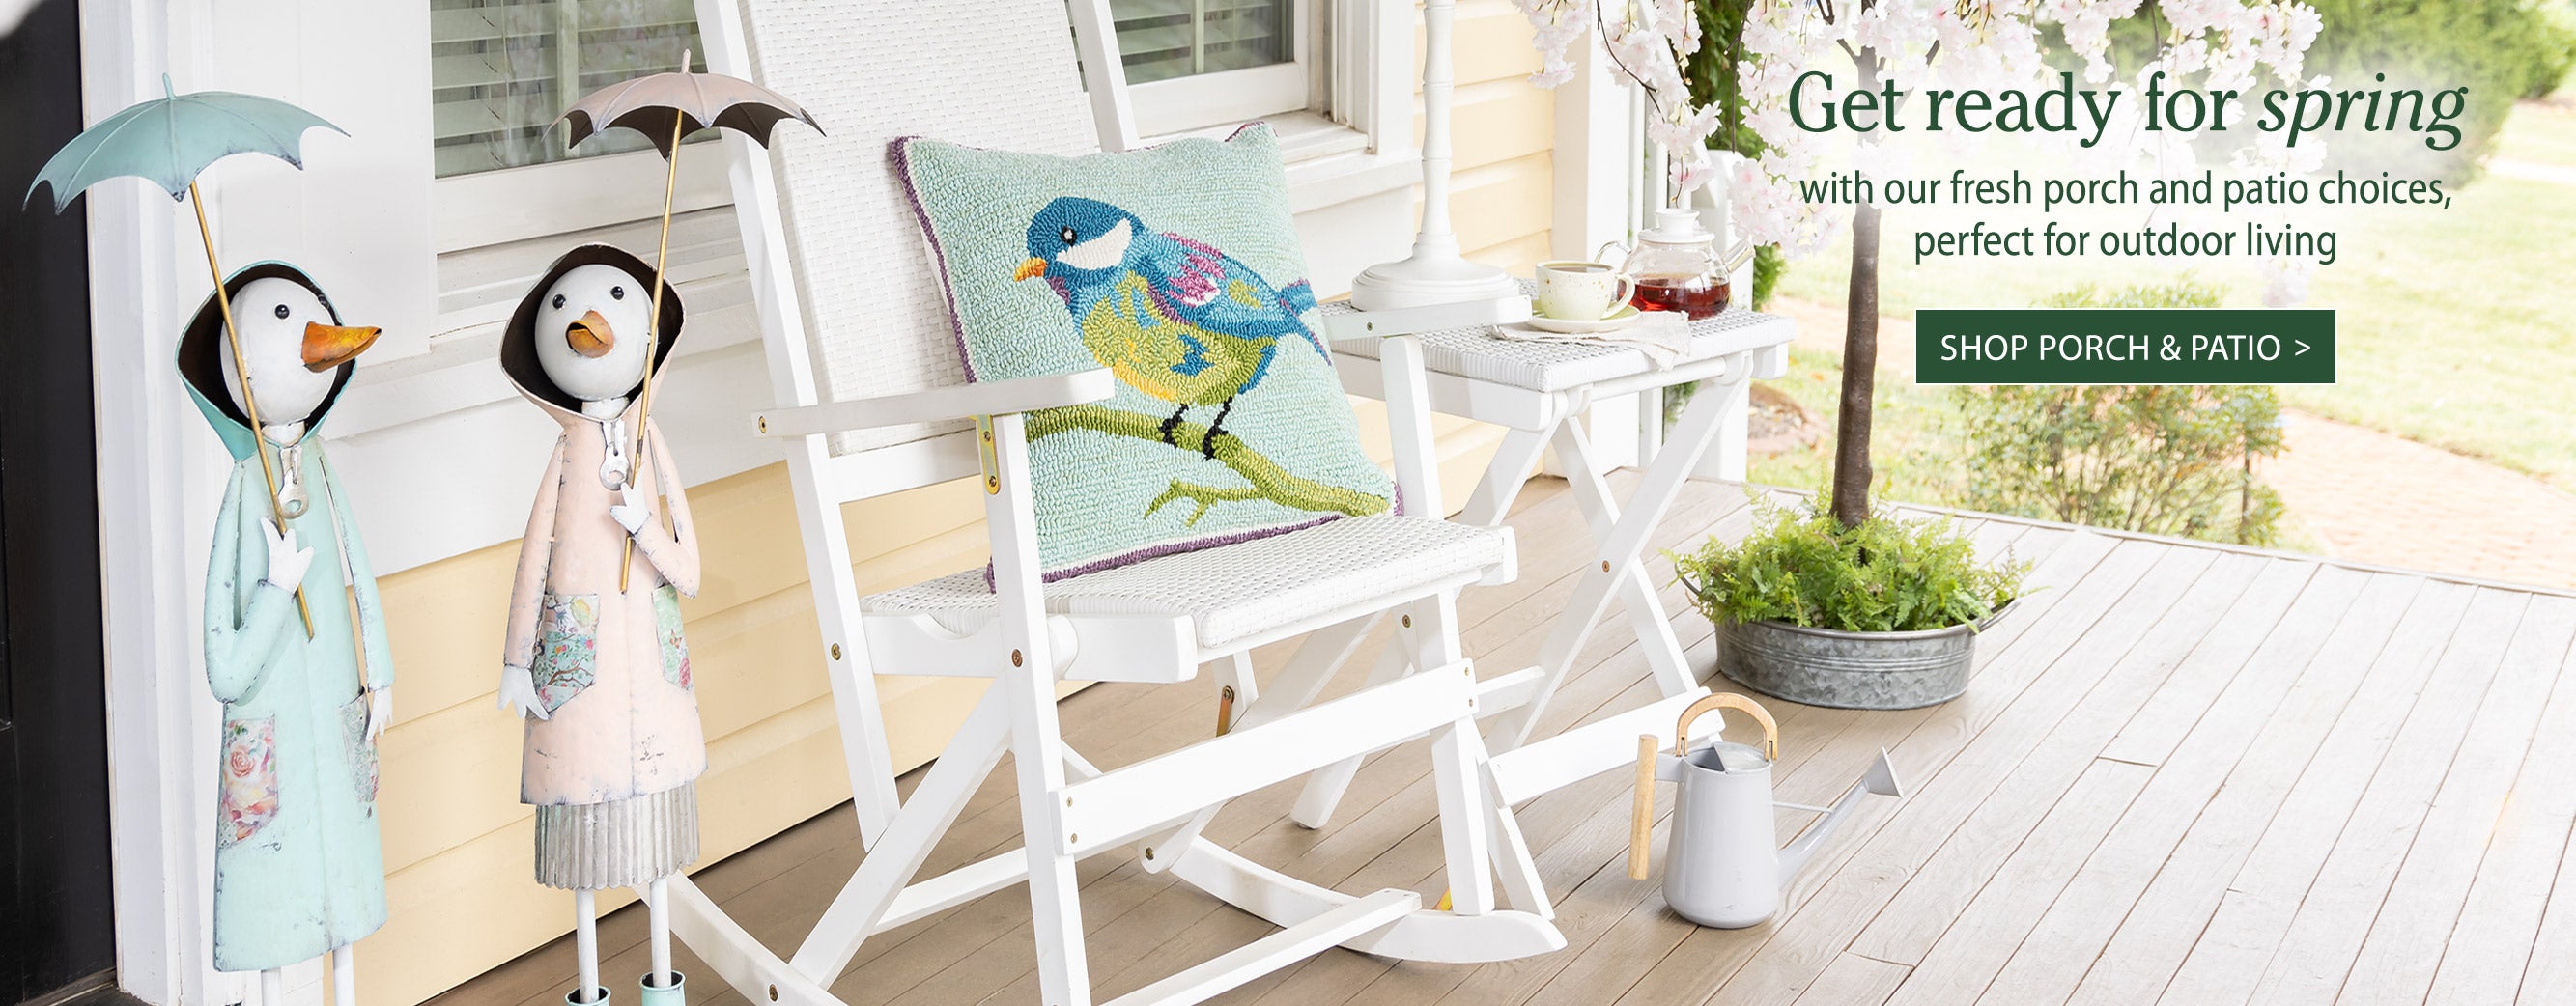 Image of front porch with white rocker, statues with umbrellas & cherry trees. Get ready for spring with our fresh portch and patio choices, perfect for outdoor living SHOP PORCH & PATIO